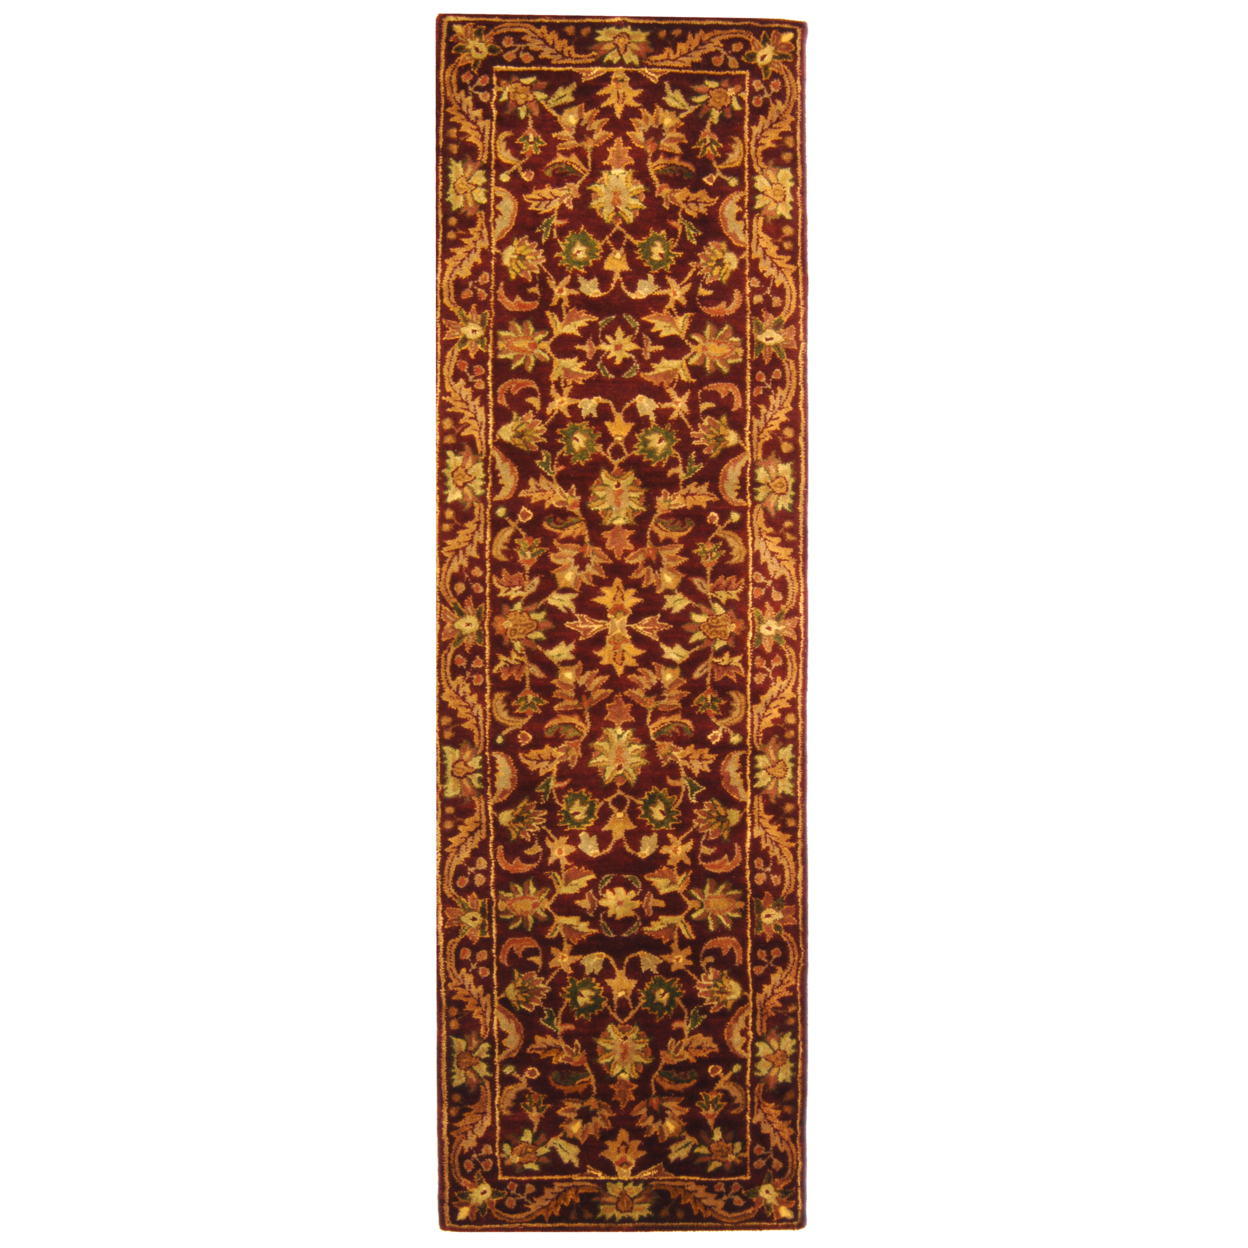 SAFAVIEH Antiquity Carmella Floral Bordered Wool Area Rug, Wine/Gold, 3' x 5' - image 3 of 10